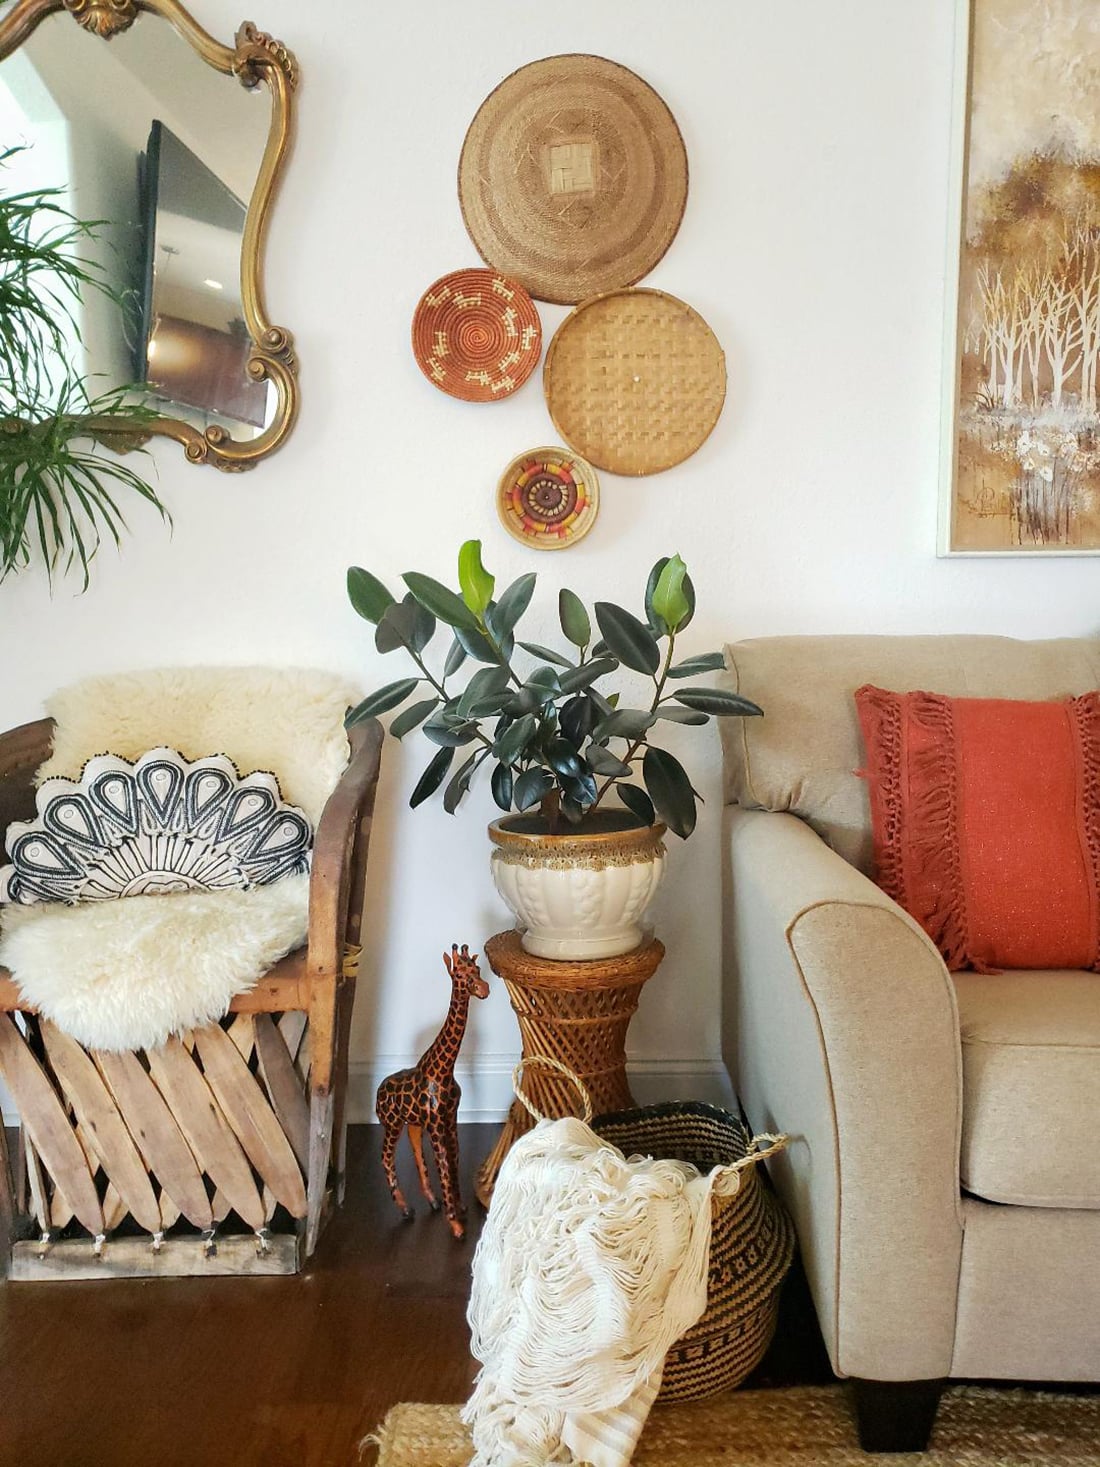 Thrifty Bohemian Decor • Wall Around the World • Little Gold Pixel • All photos © Tracey Hairston • Come inside Tracey's Virginia home and get the secrets of her thrifty bohemian gallery walls in the latest installment of Wall Around the World. #thrifty #bohemian #boho #decor #gallerywalls #gallerywallideas